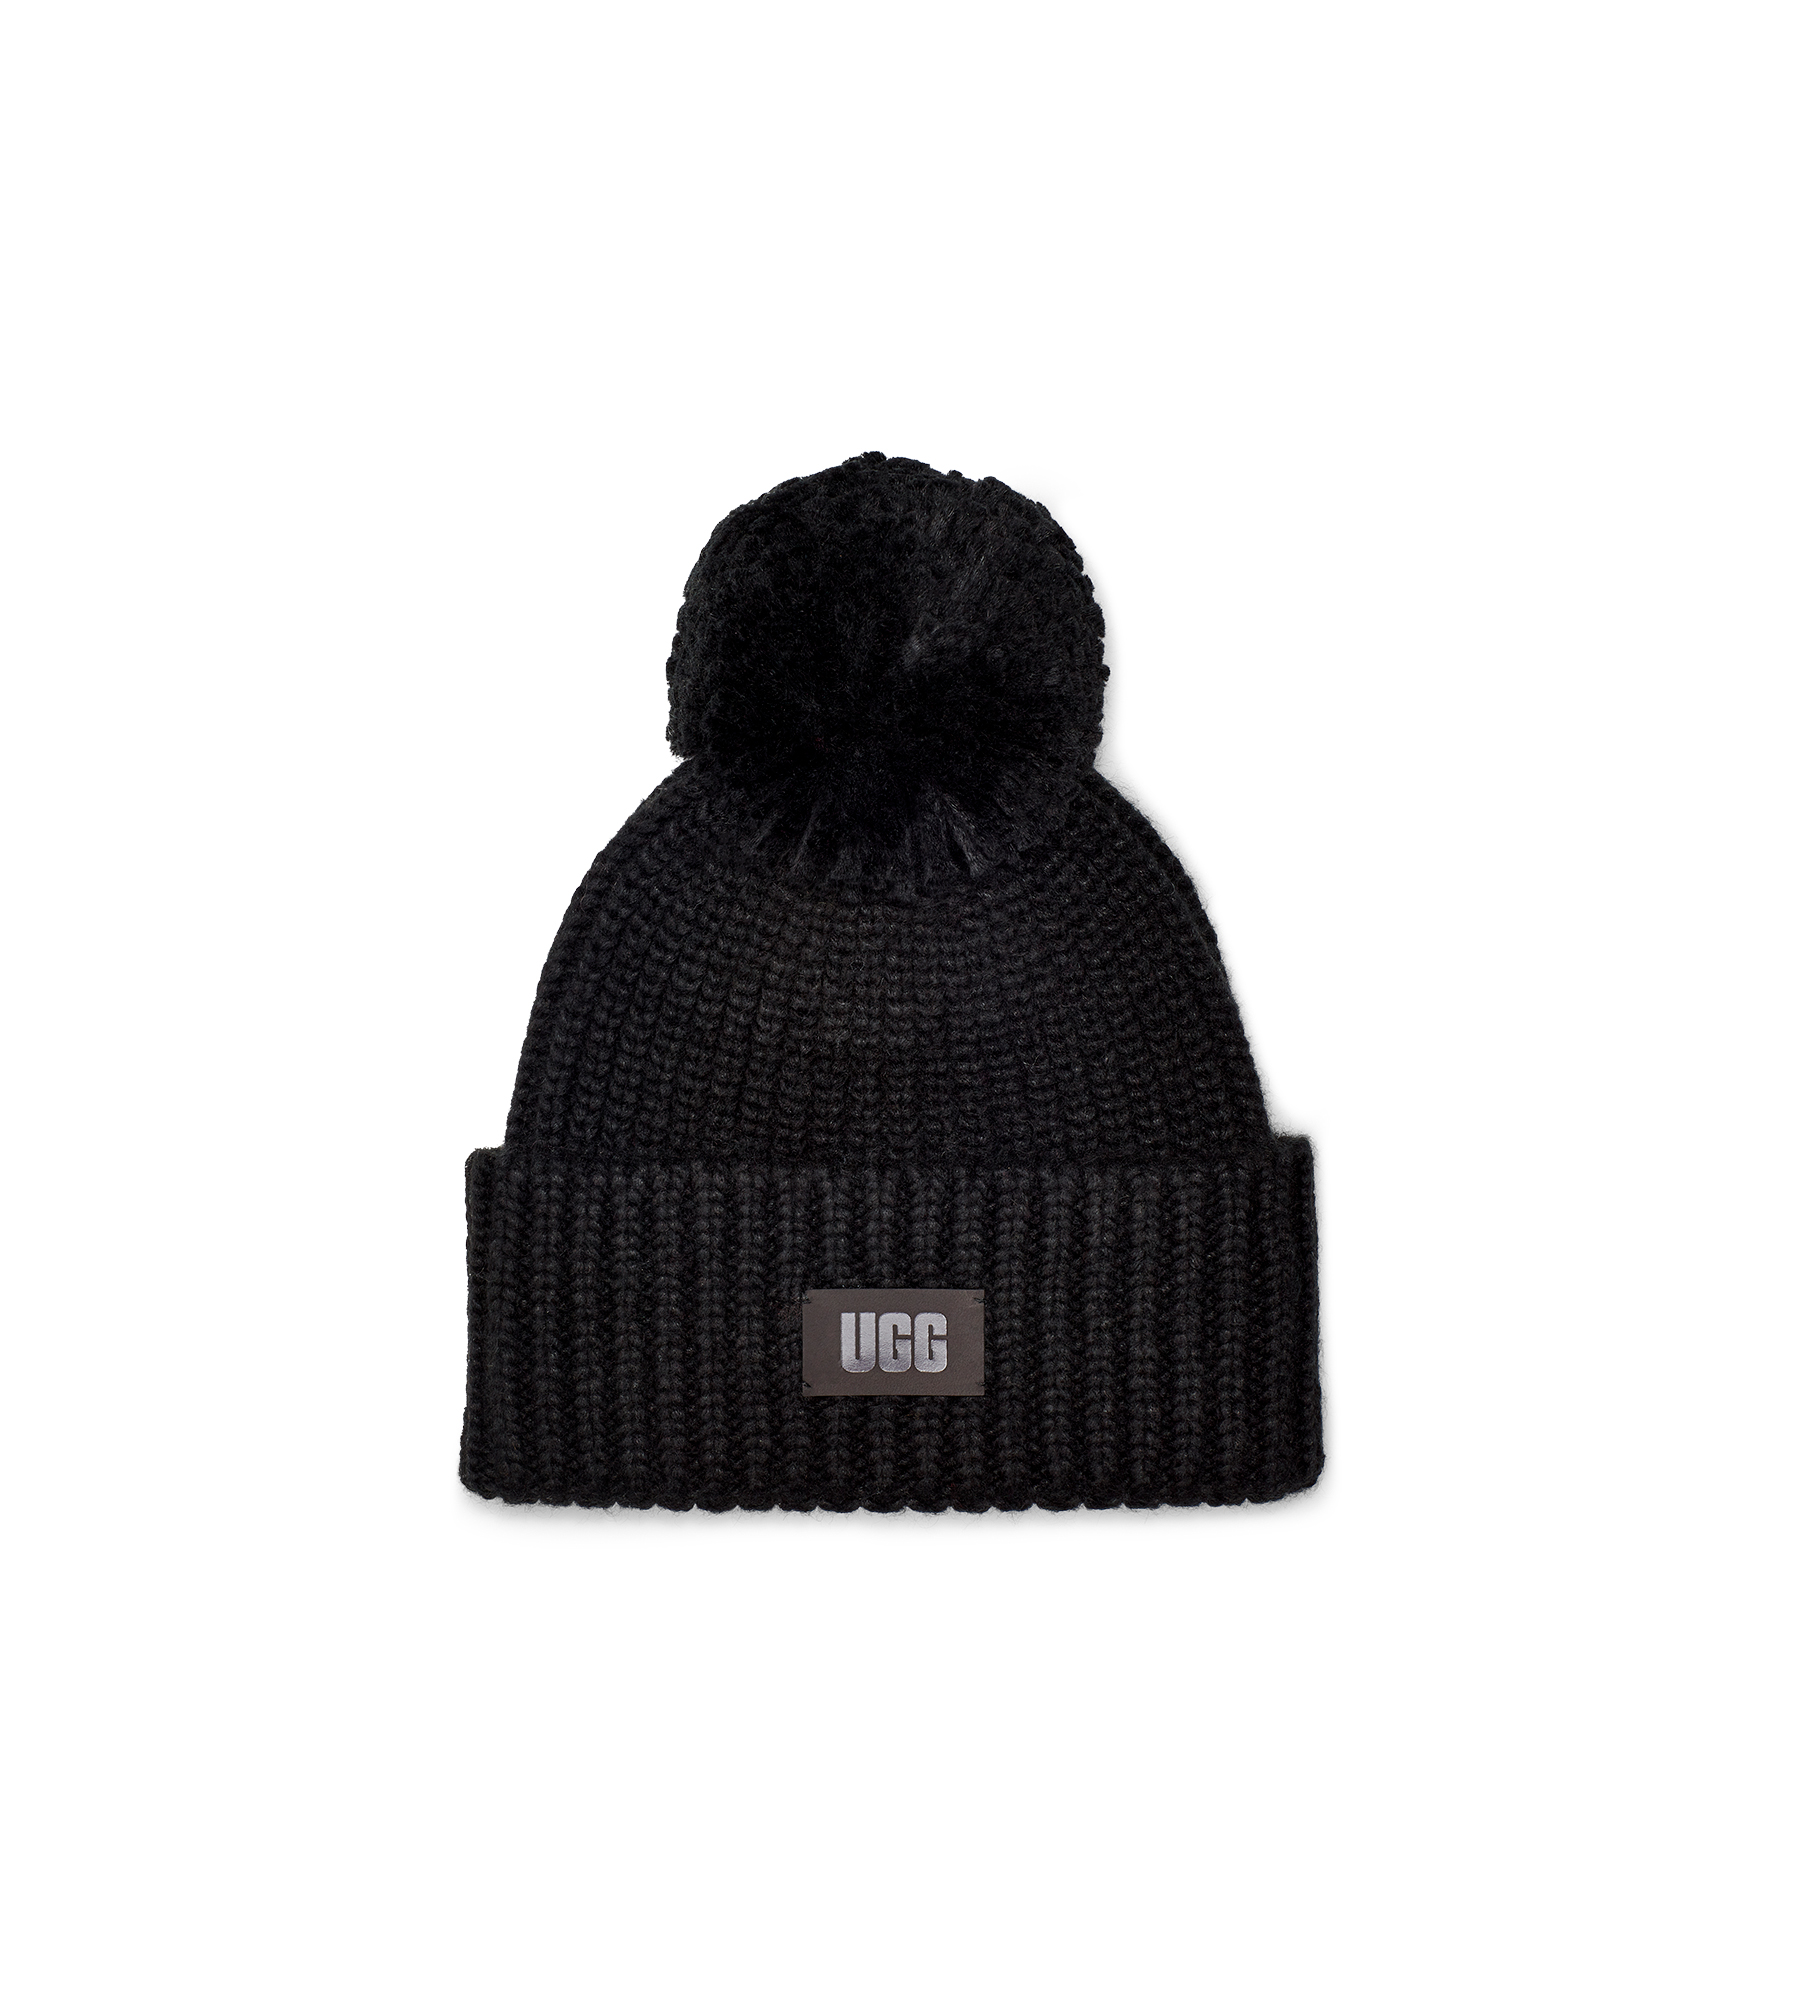 UGG Chunky Rib Knit Chapeaux pour Femme in Black, Taille O/S, Mélange D’Acrylique product